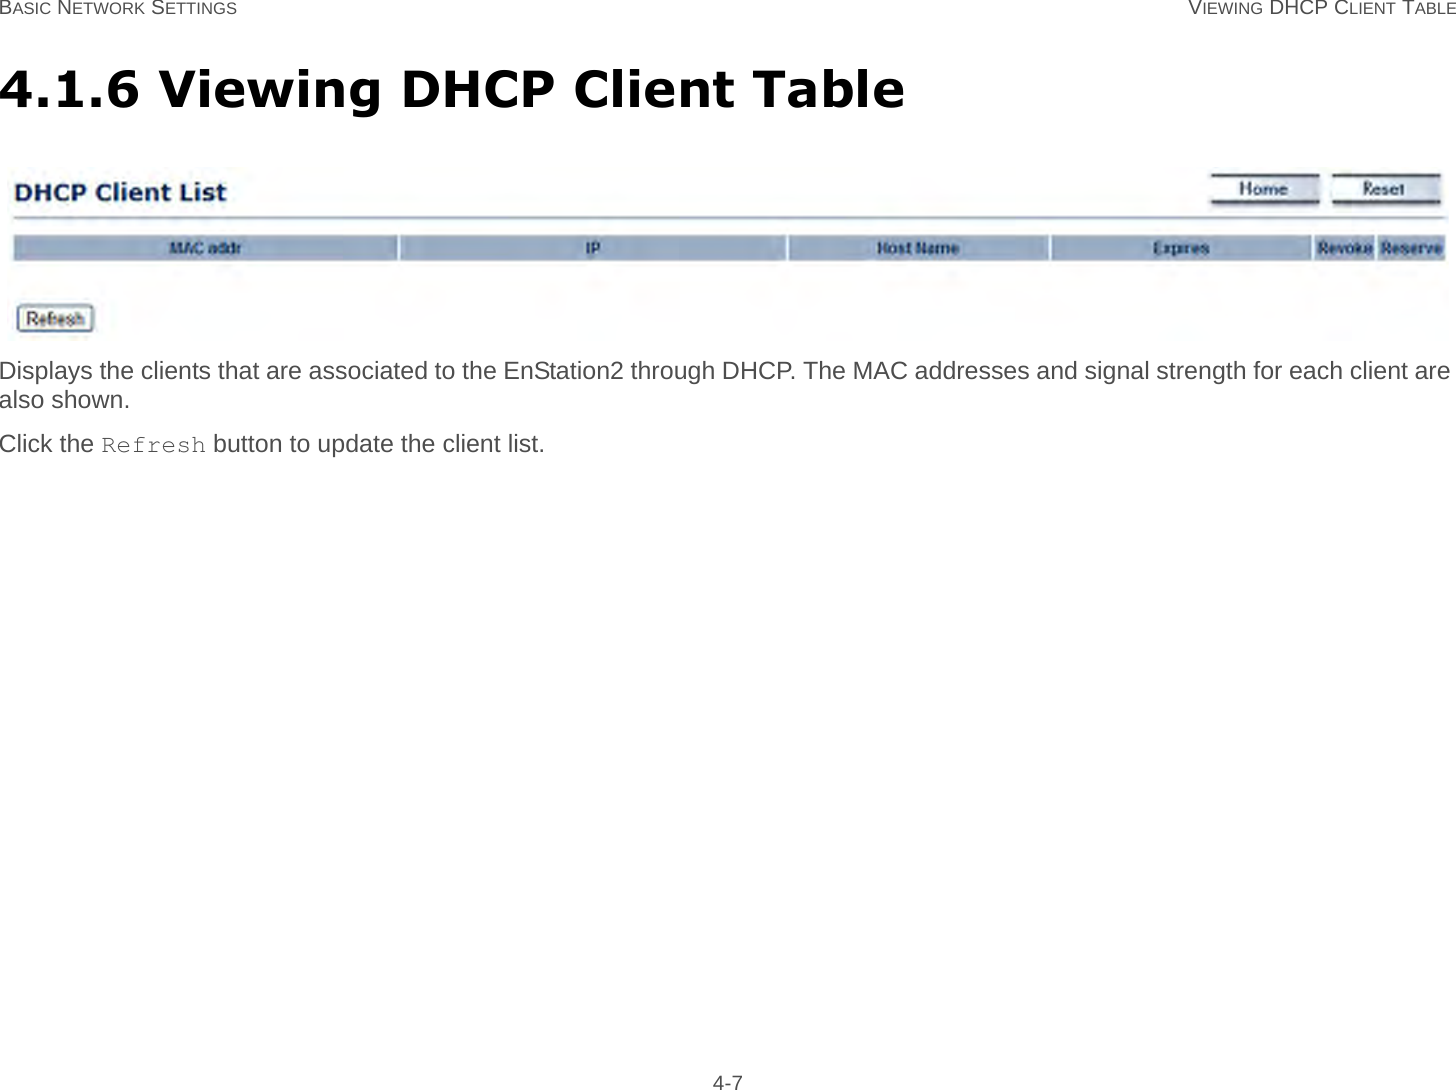 BASIC NETWORK SETTINGS VIEWING DHCP CLIENT TABLE 4-74.1.6 Viewing DHCP Client TableDisplays the clients that are associated to the EnStation2 through DHCP. The MAC addresses and signal strength for each client are also shown.Click the Refresh button to update the client list.